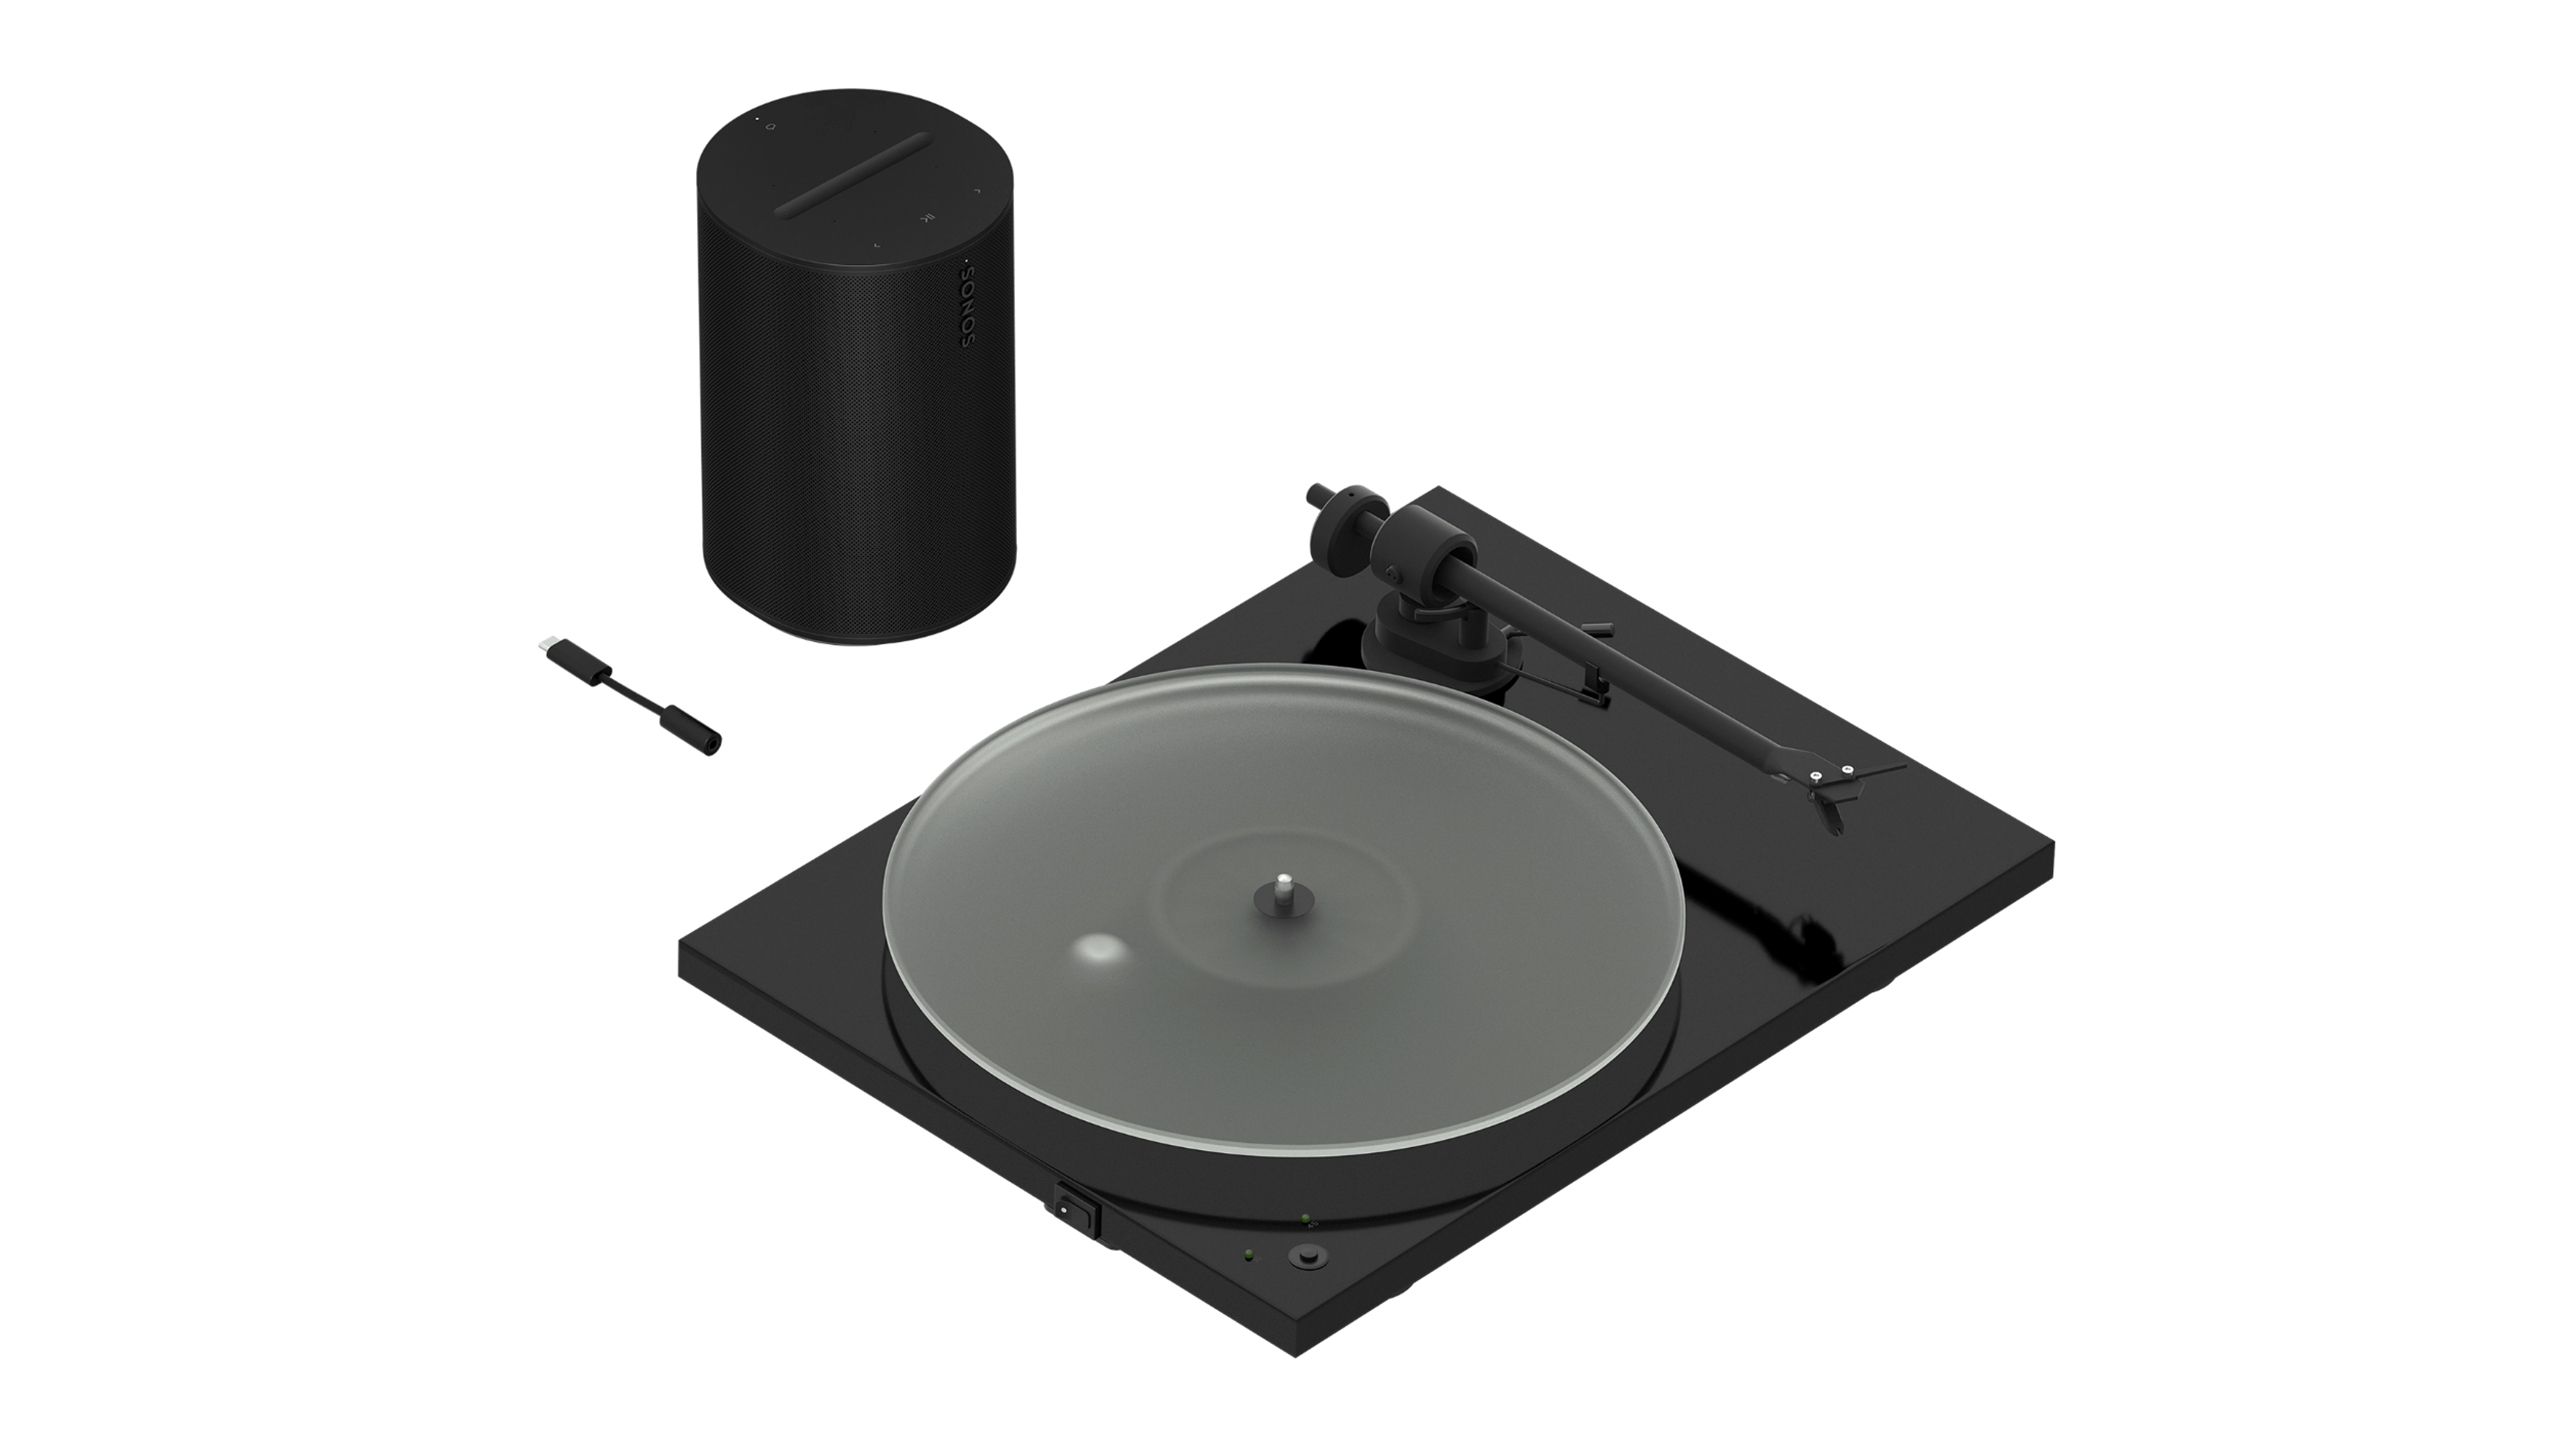 The Sonos Pro-Ject T1 Phono SB Turntable and Era 100 speaker against a white background. 